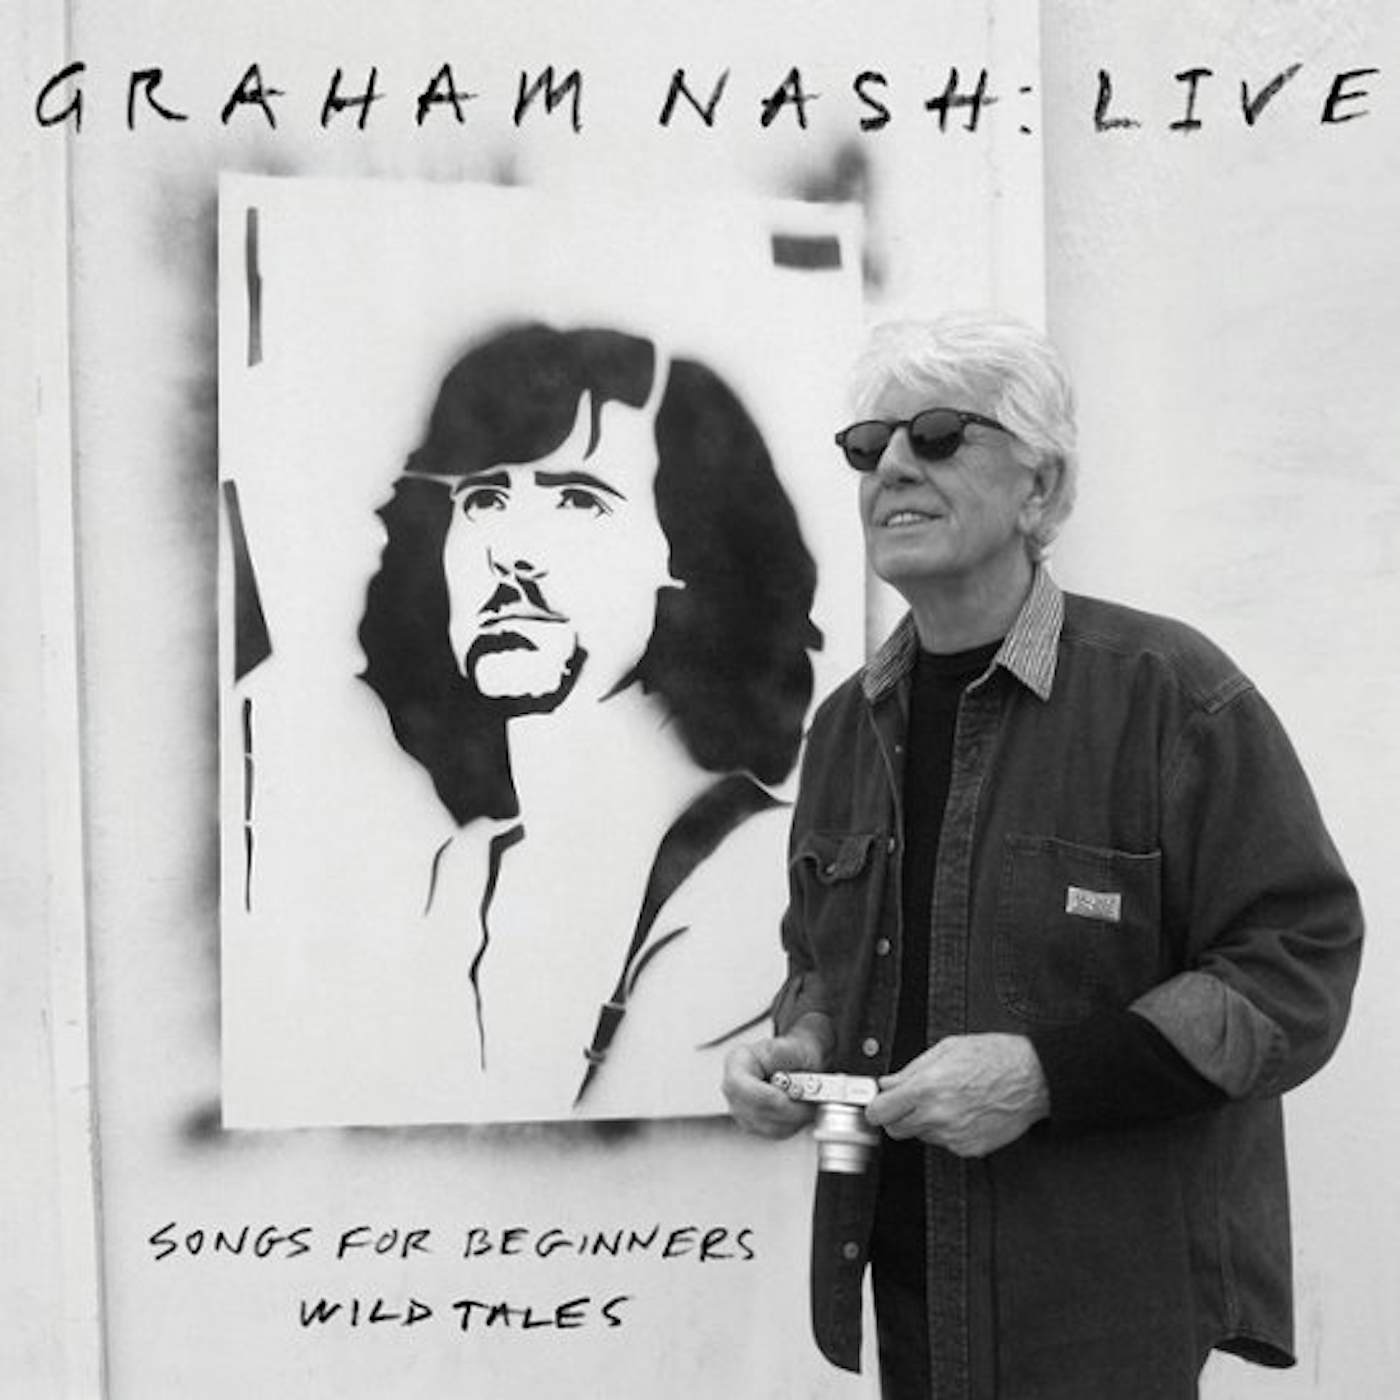 Graham Nash LIVE SONGS FOR BEGINNERS WILD TALES (2LP) Vinyl Record